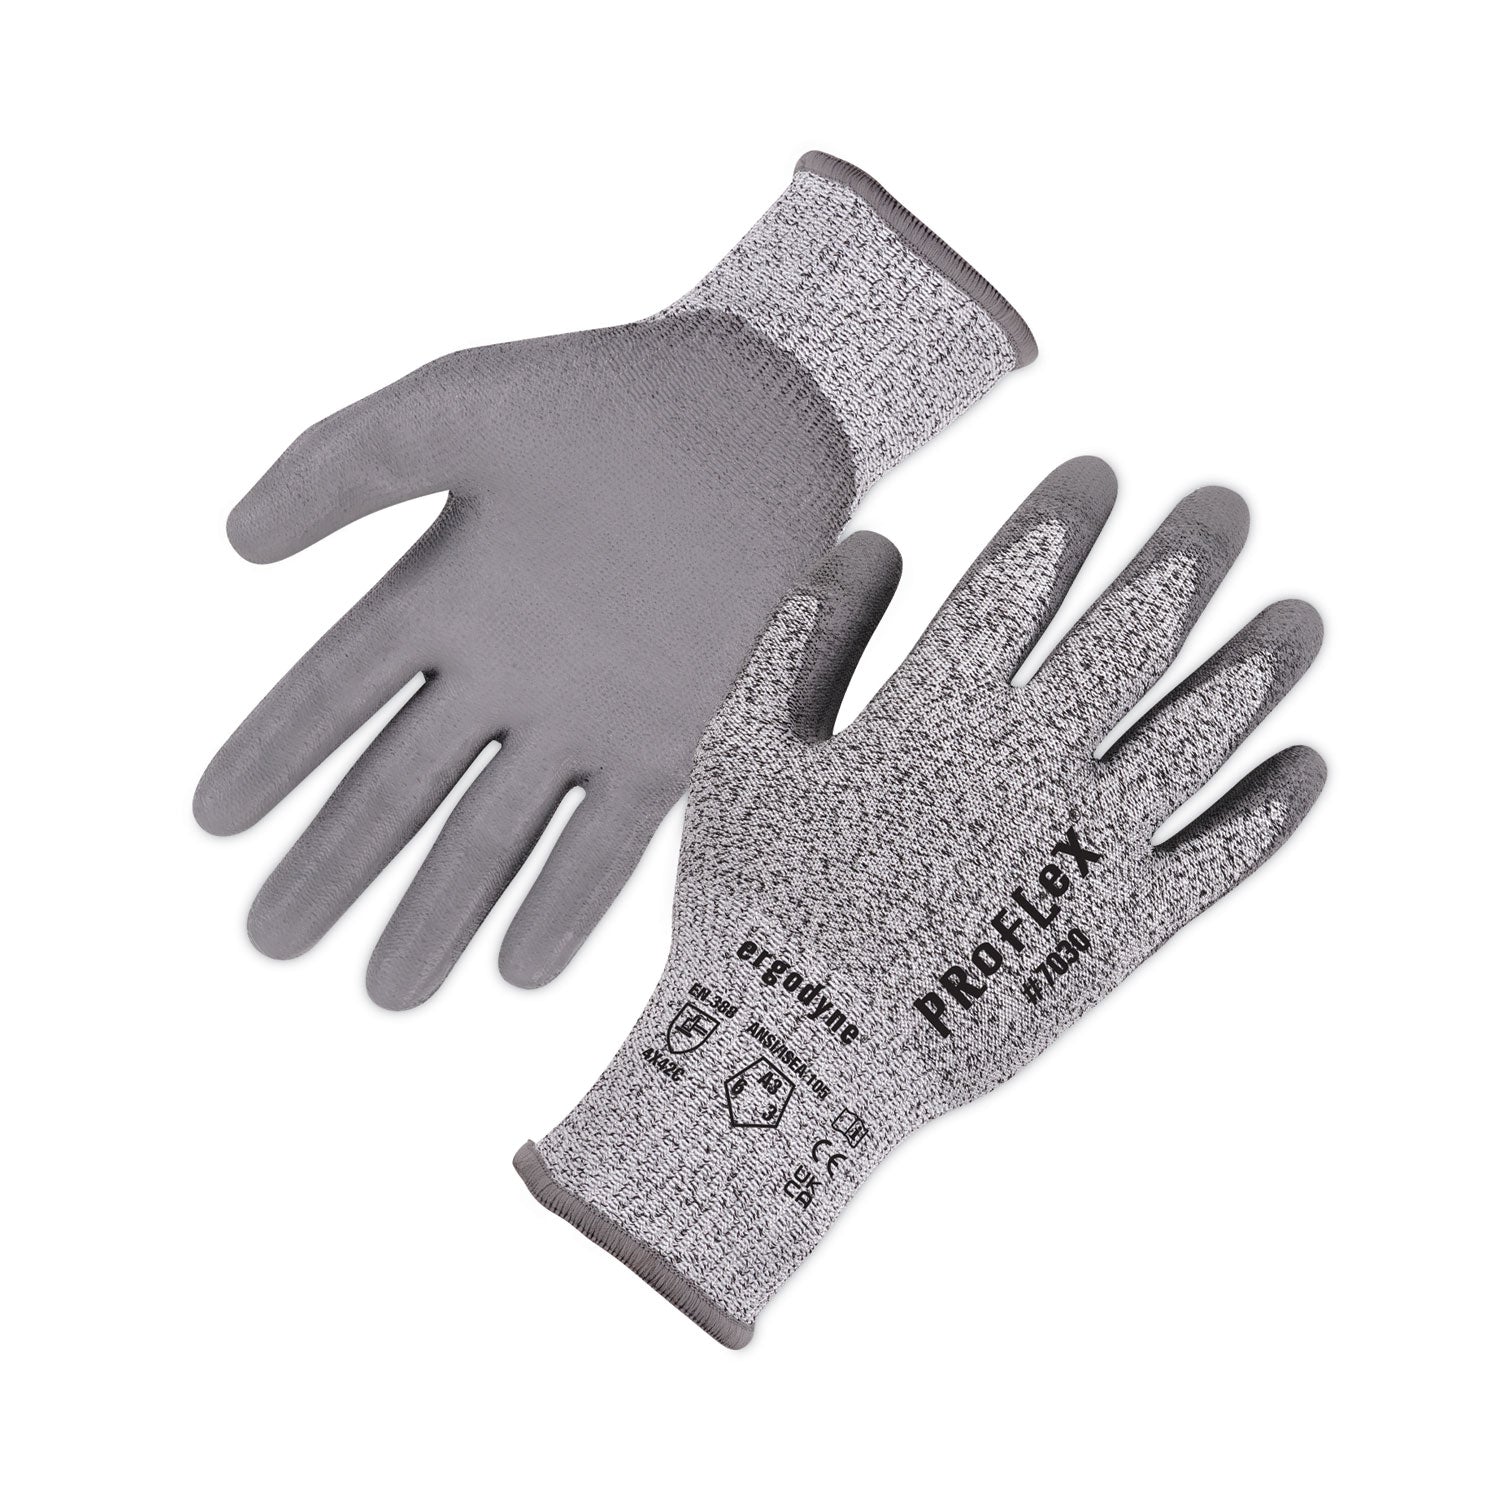 proflex-7030-ansi-a3-pu-coated-cr-gloves-gray-large-12-pairs-pack-ships-in-1-3-business-days_ego10454 - 1